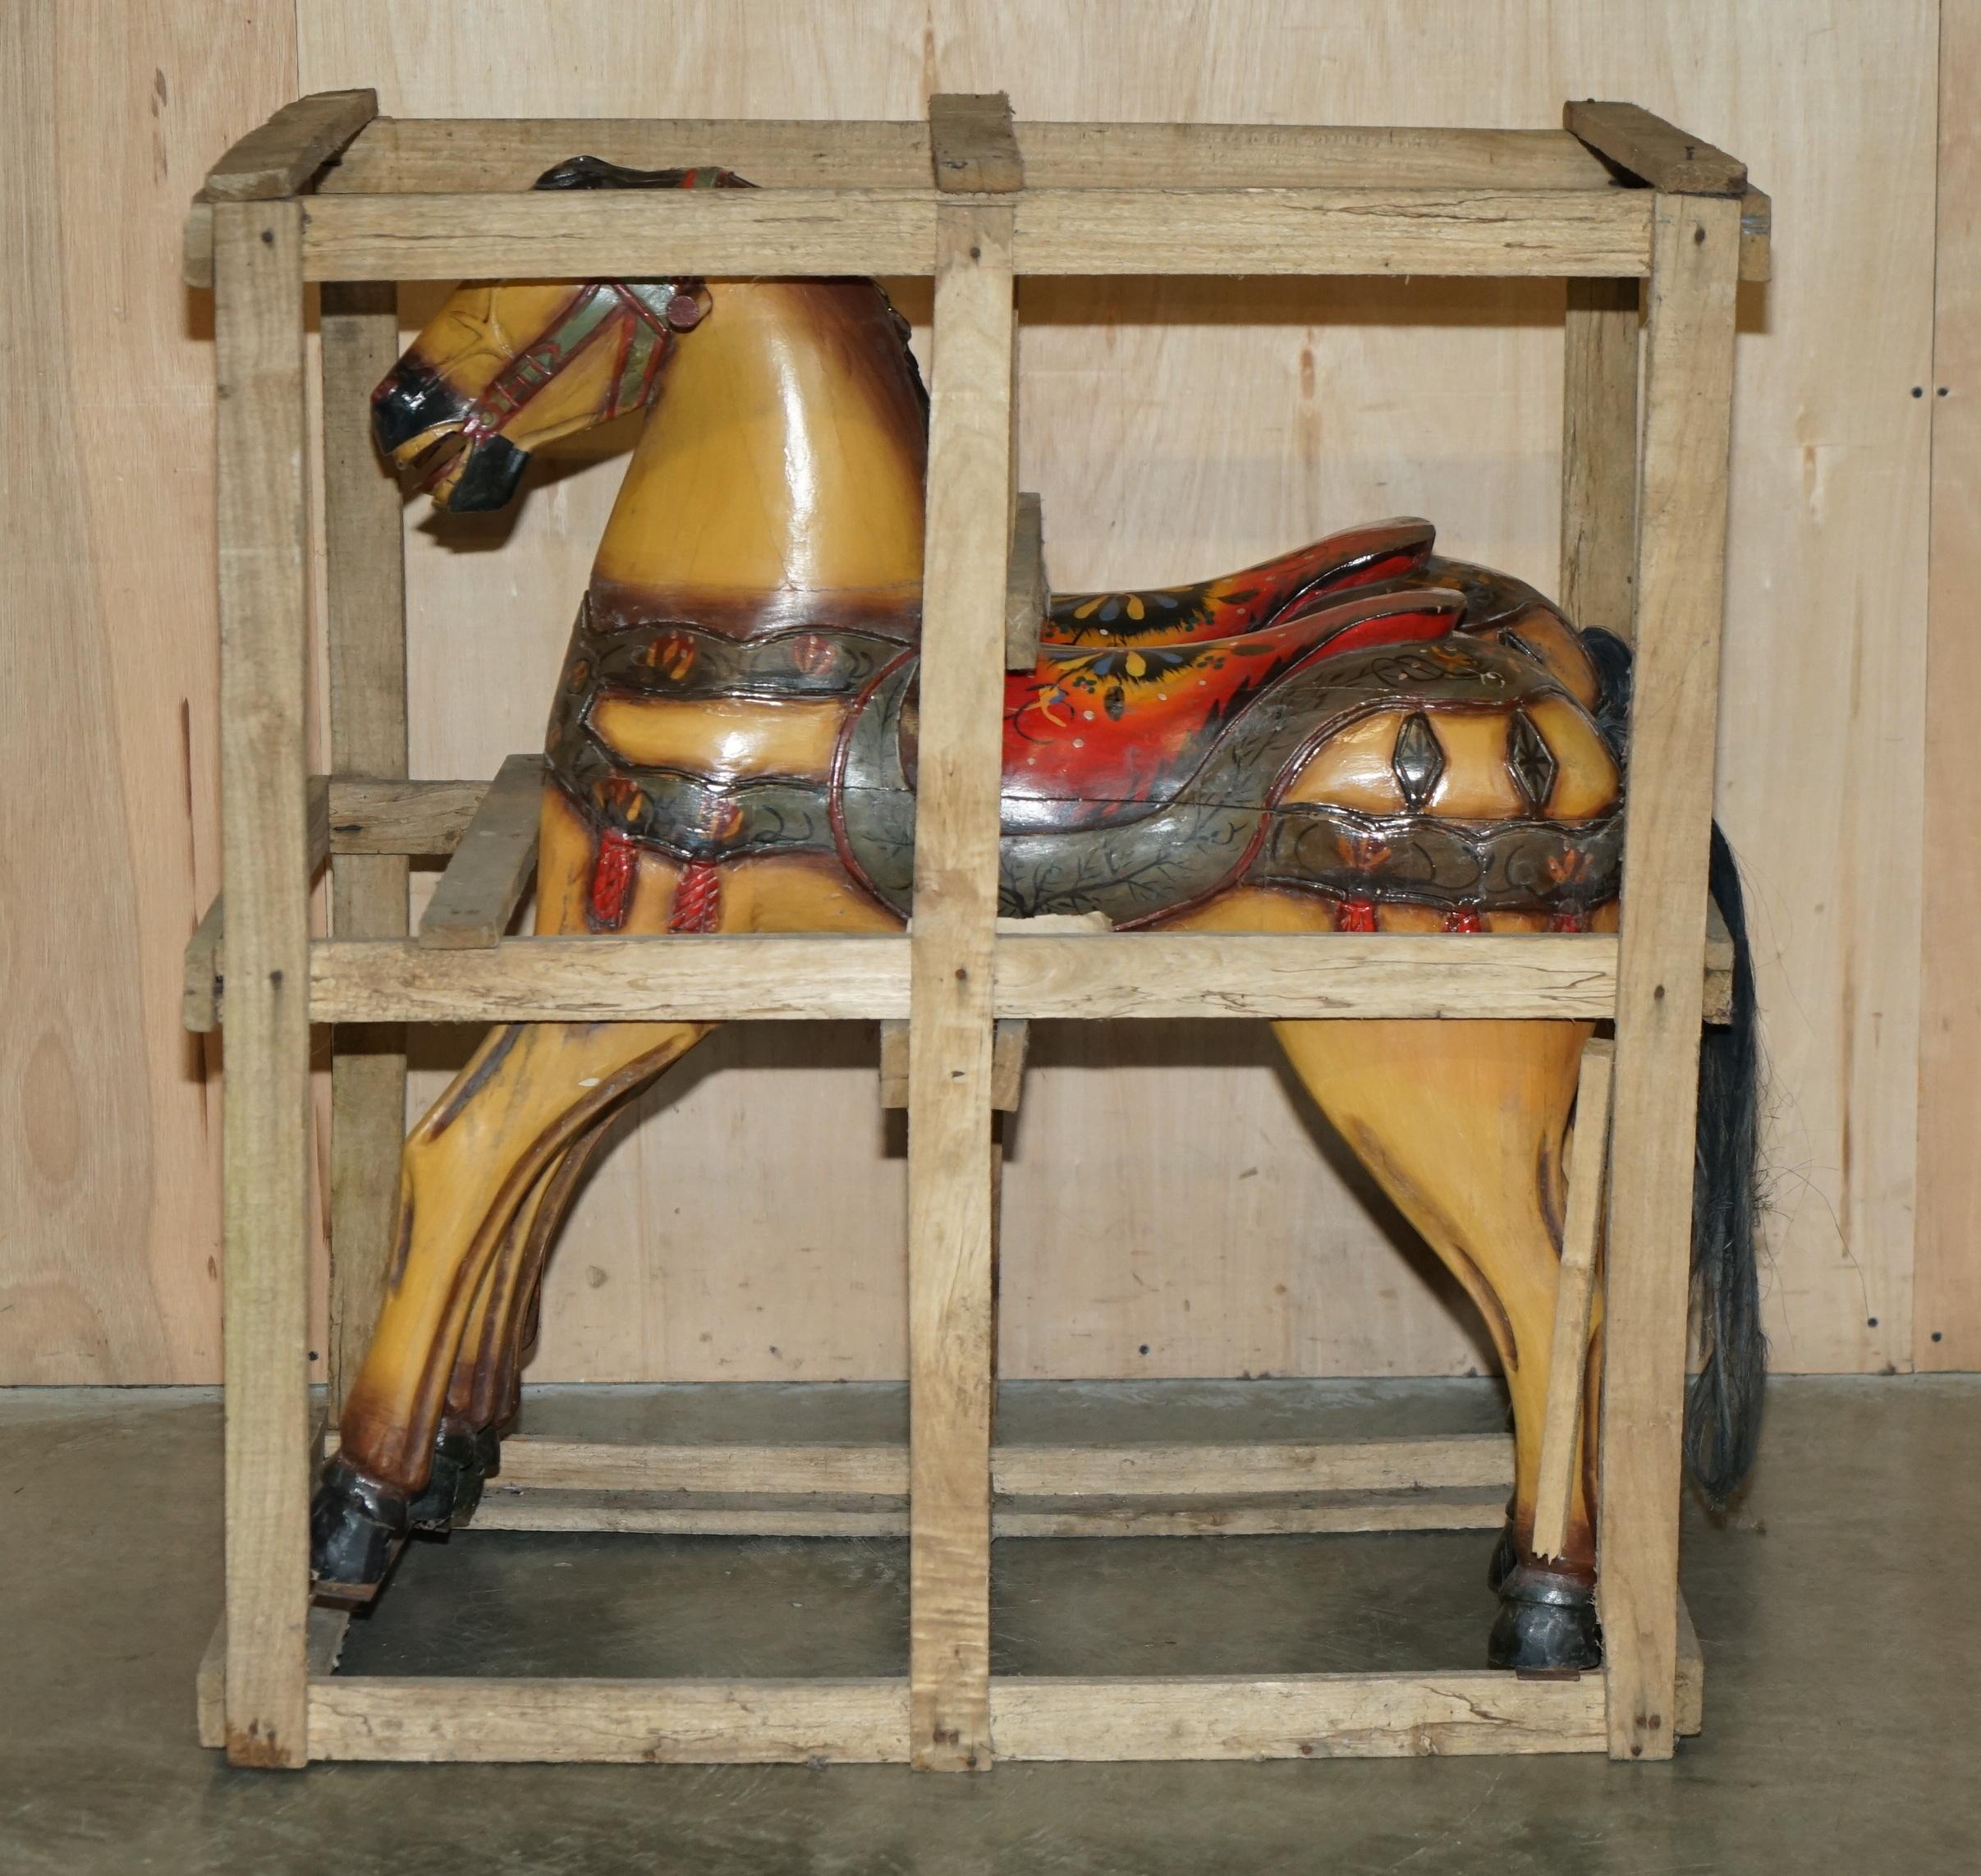 Royal House Antiques

Royal House Antiques is delighted to offer for sale this absolutely exquisite pair of new old stock Fairground ride horses

Please note the delivery fee listed is just a guide, it covers within the M25 only for the UK and local